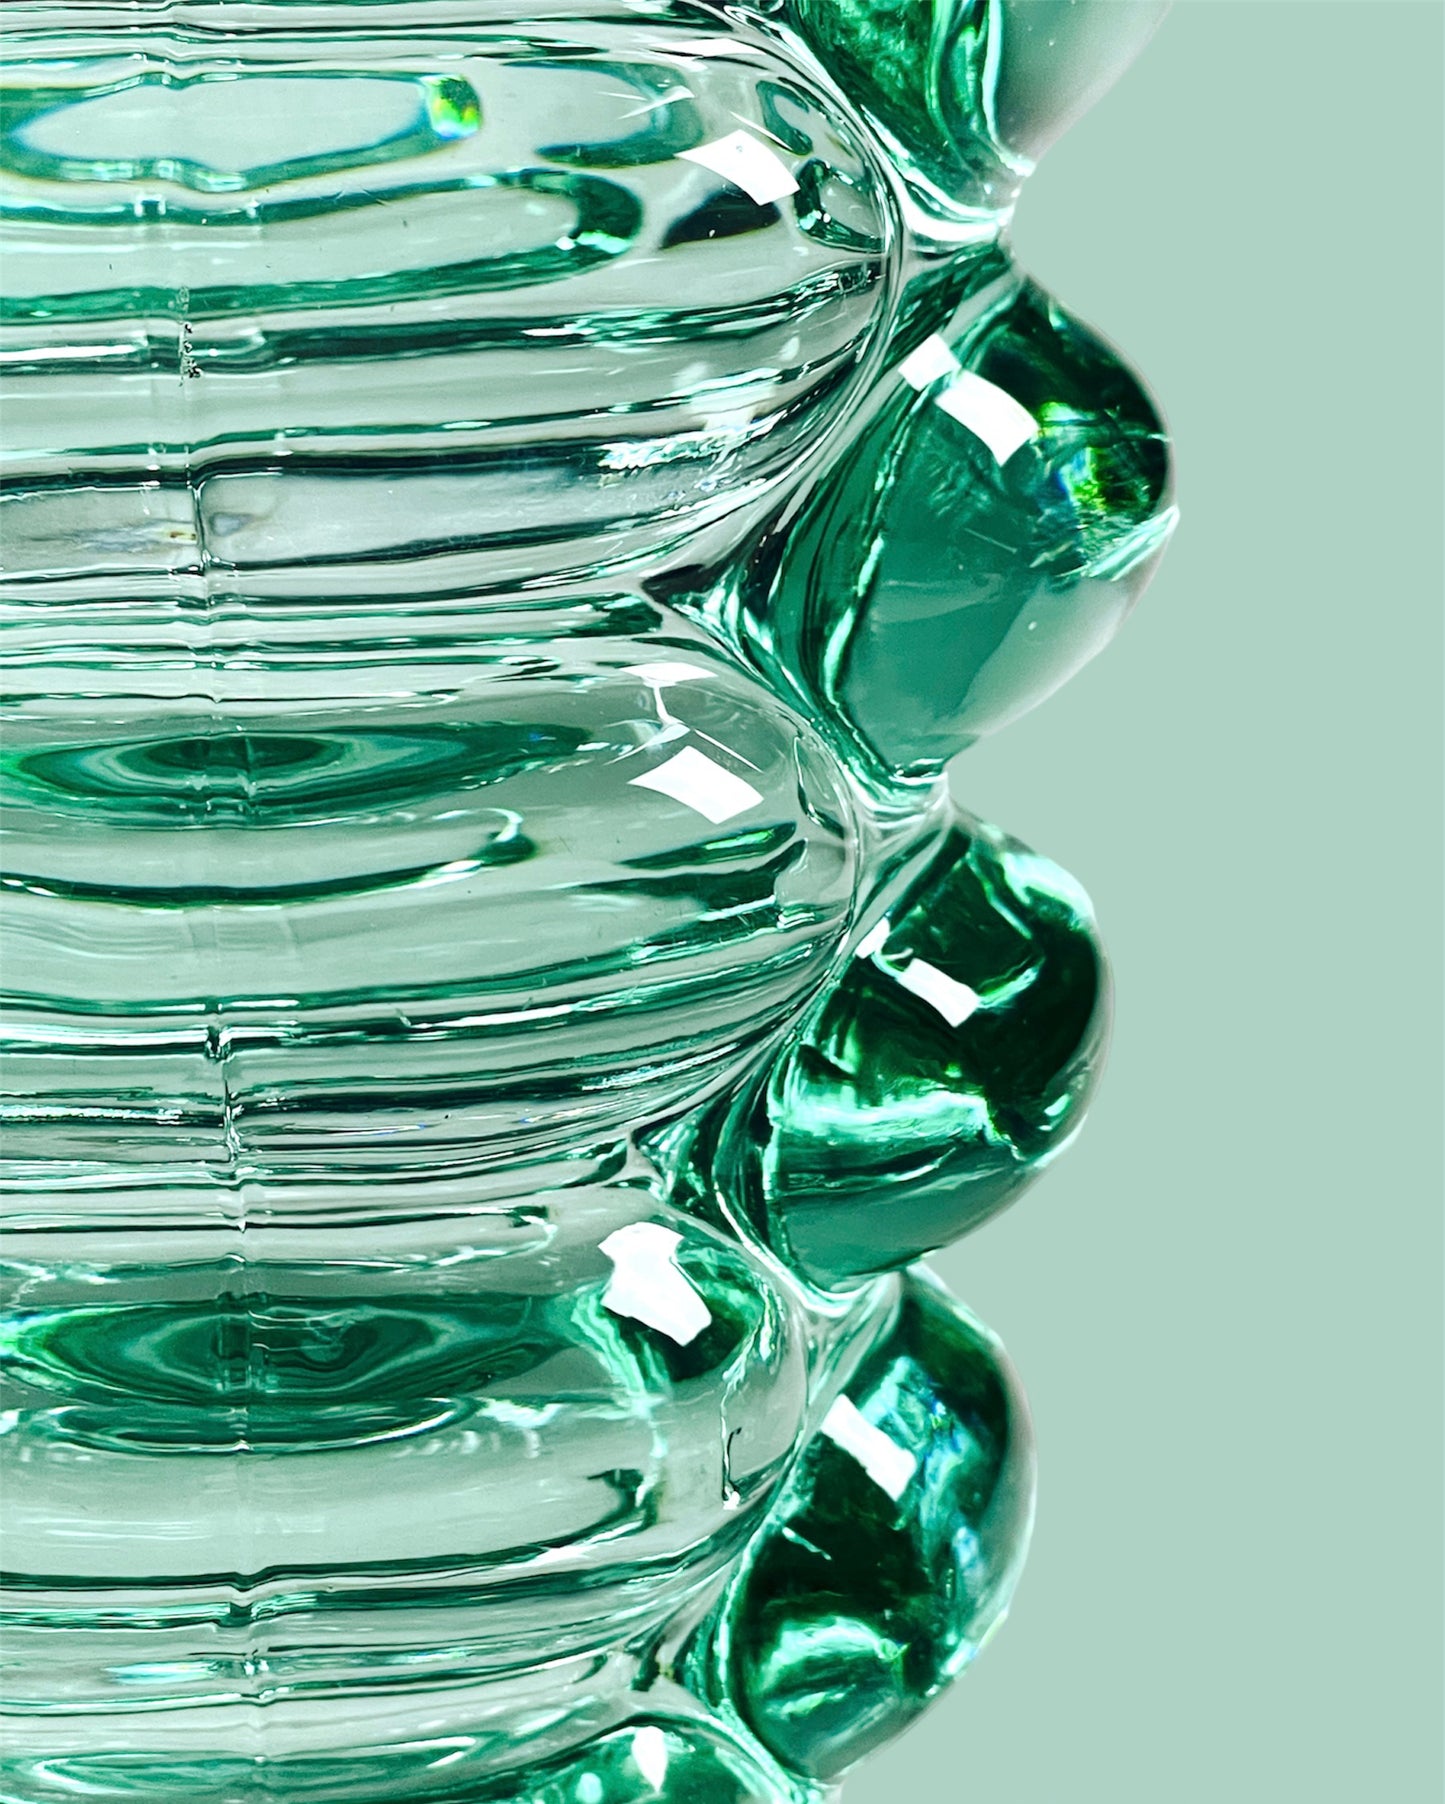 Curvy pressed glass vase in lively turquoise